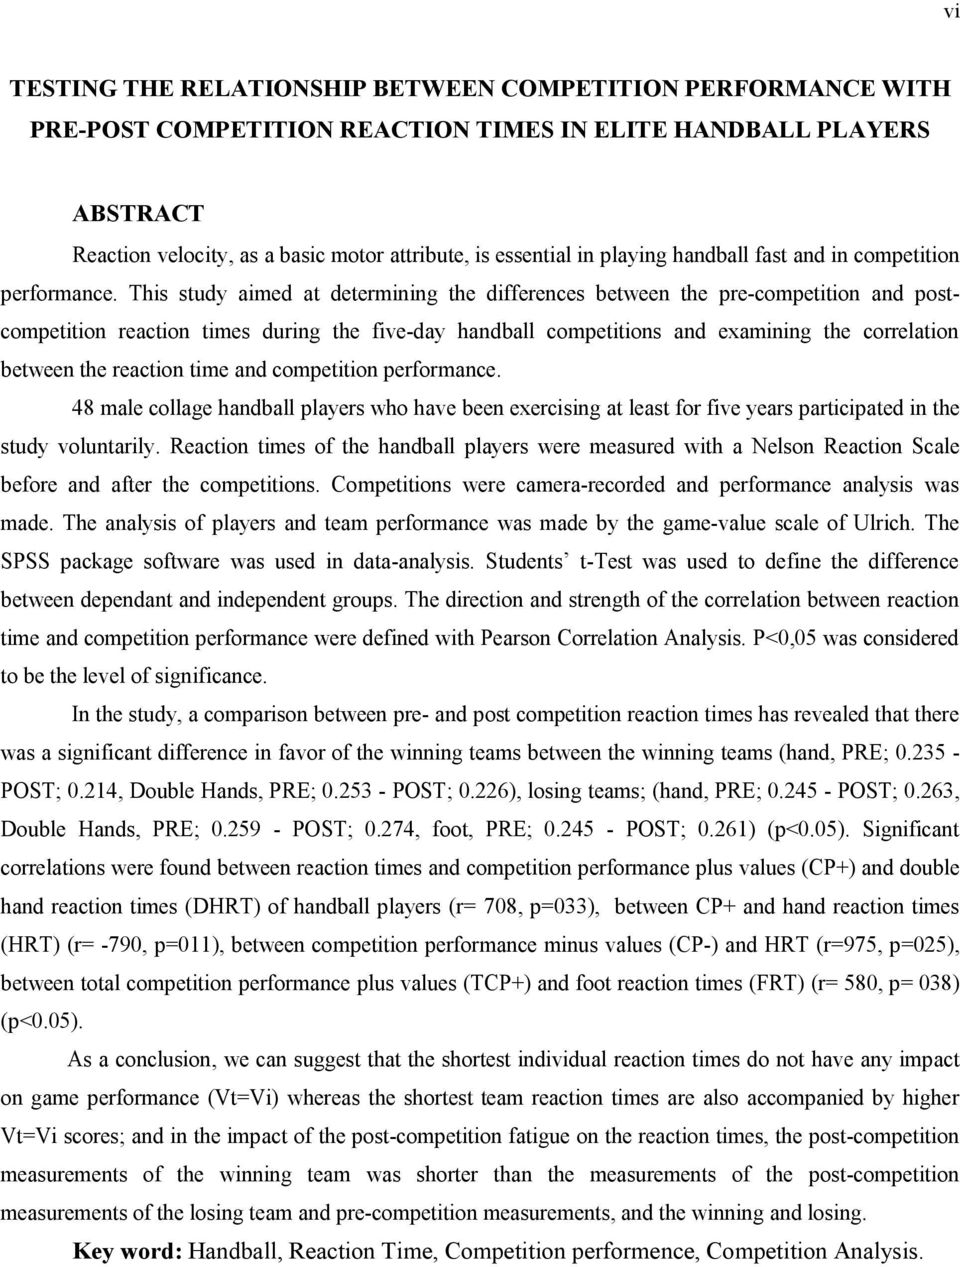 This study aimed at determining the differences between the pre-competition and postcompetition reaction times during the five-day handball competitions and examining the correlation between the